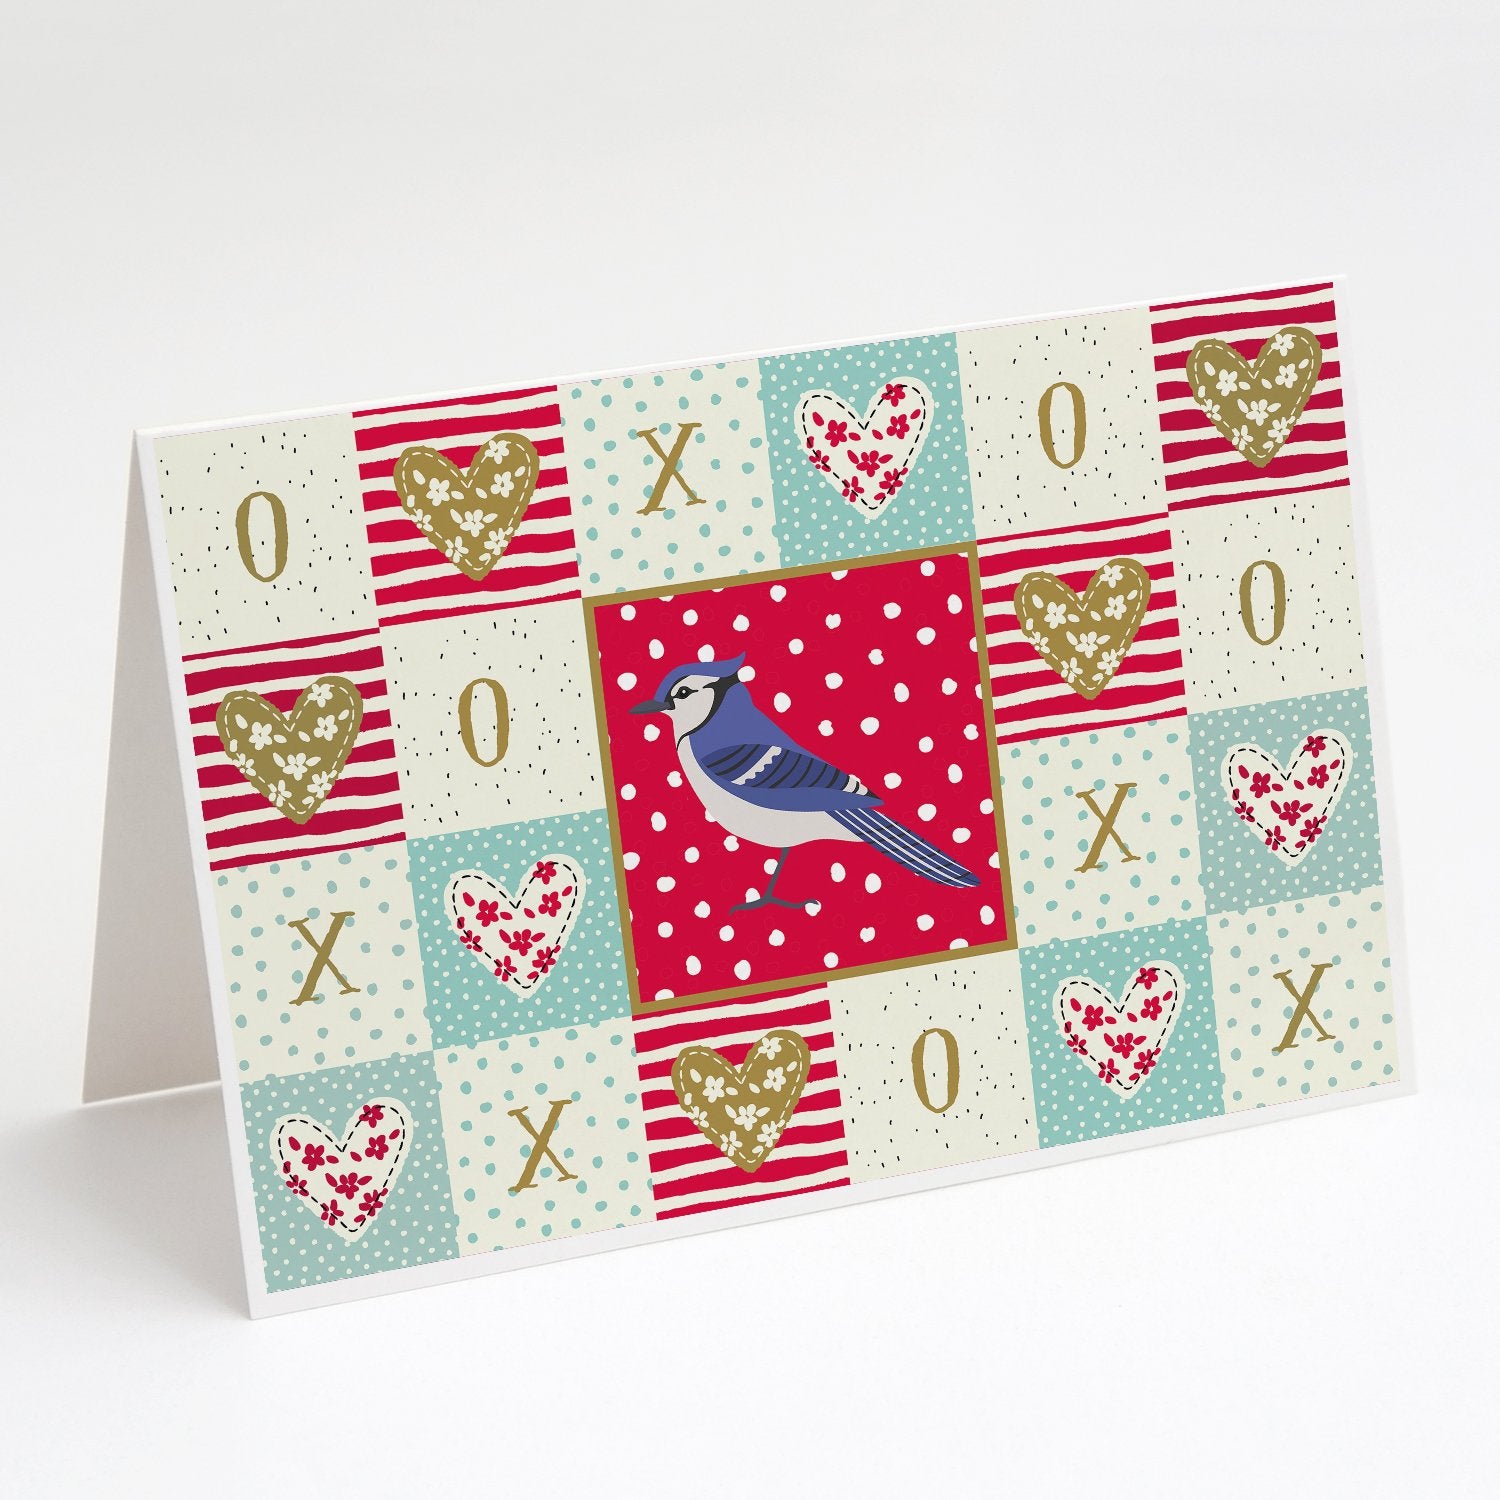 Buy this Jay Bird Love Greeting Cards and Envelopes Pack of 8